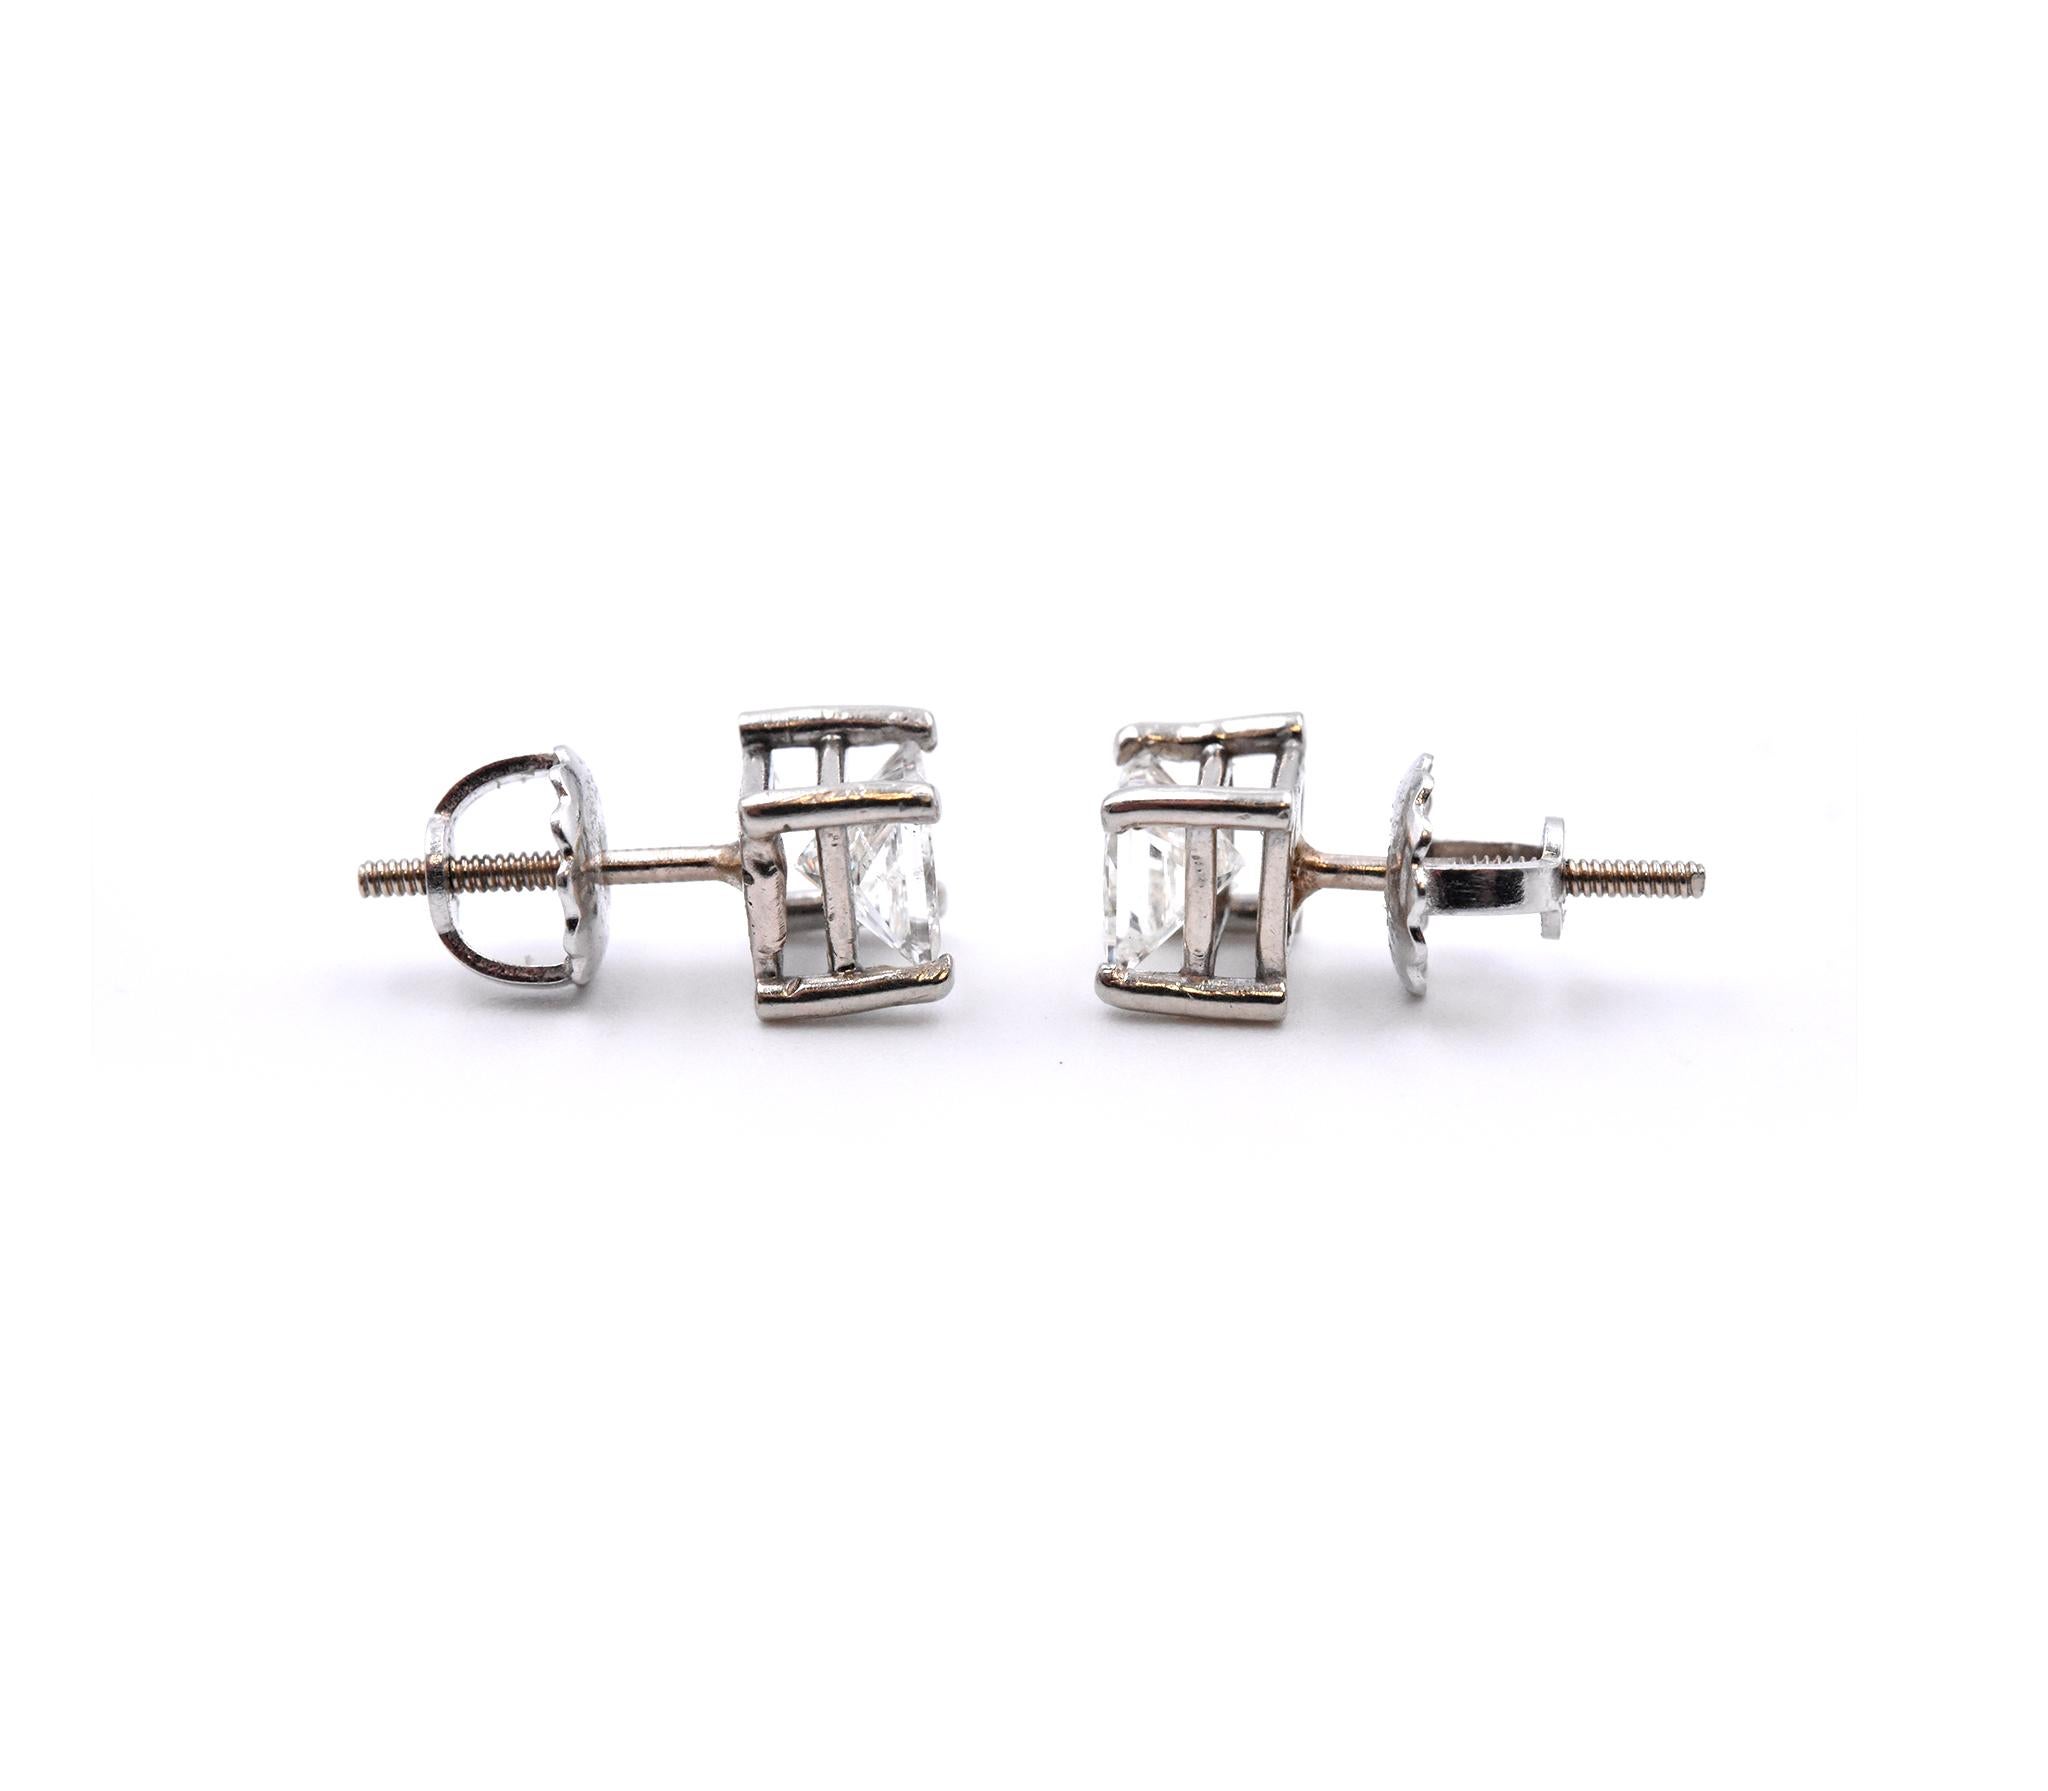 Material: 14k white gold
Diamonds: 2 princess cuts = 1.10cttw
Color: G-H
Clarity: SI1
Dimensions: earrings measure approximately 5.8mm x 5.8mm
Fastenings: post with screw backs
Weight:  1.42 grams